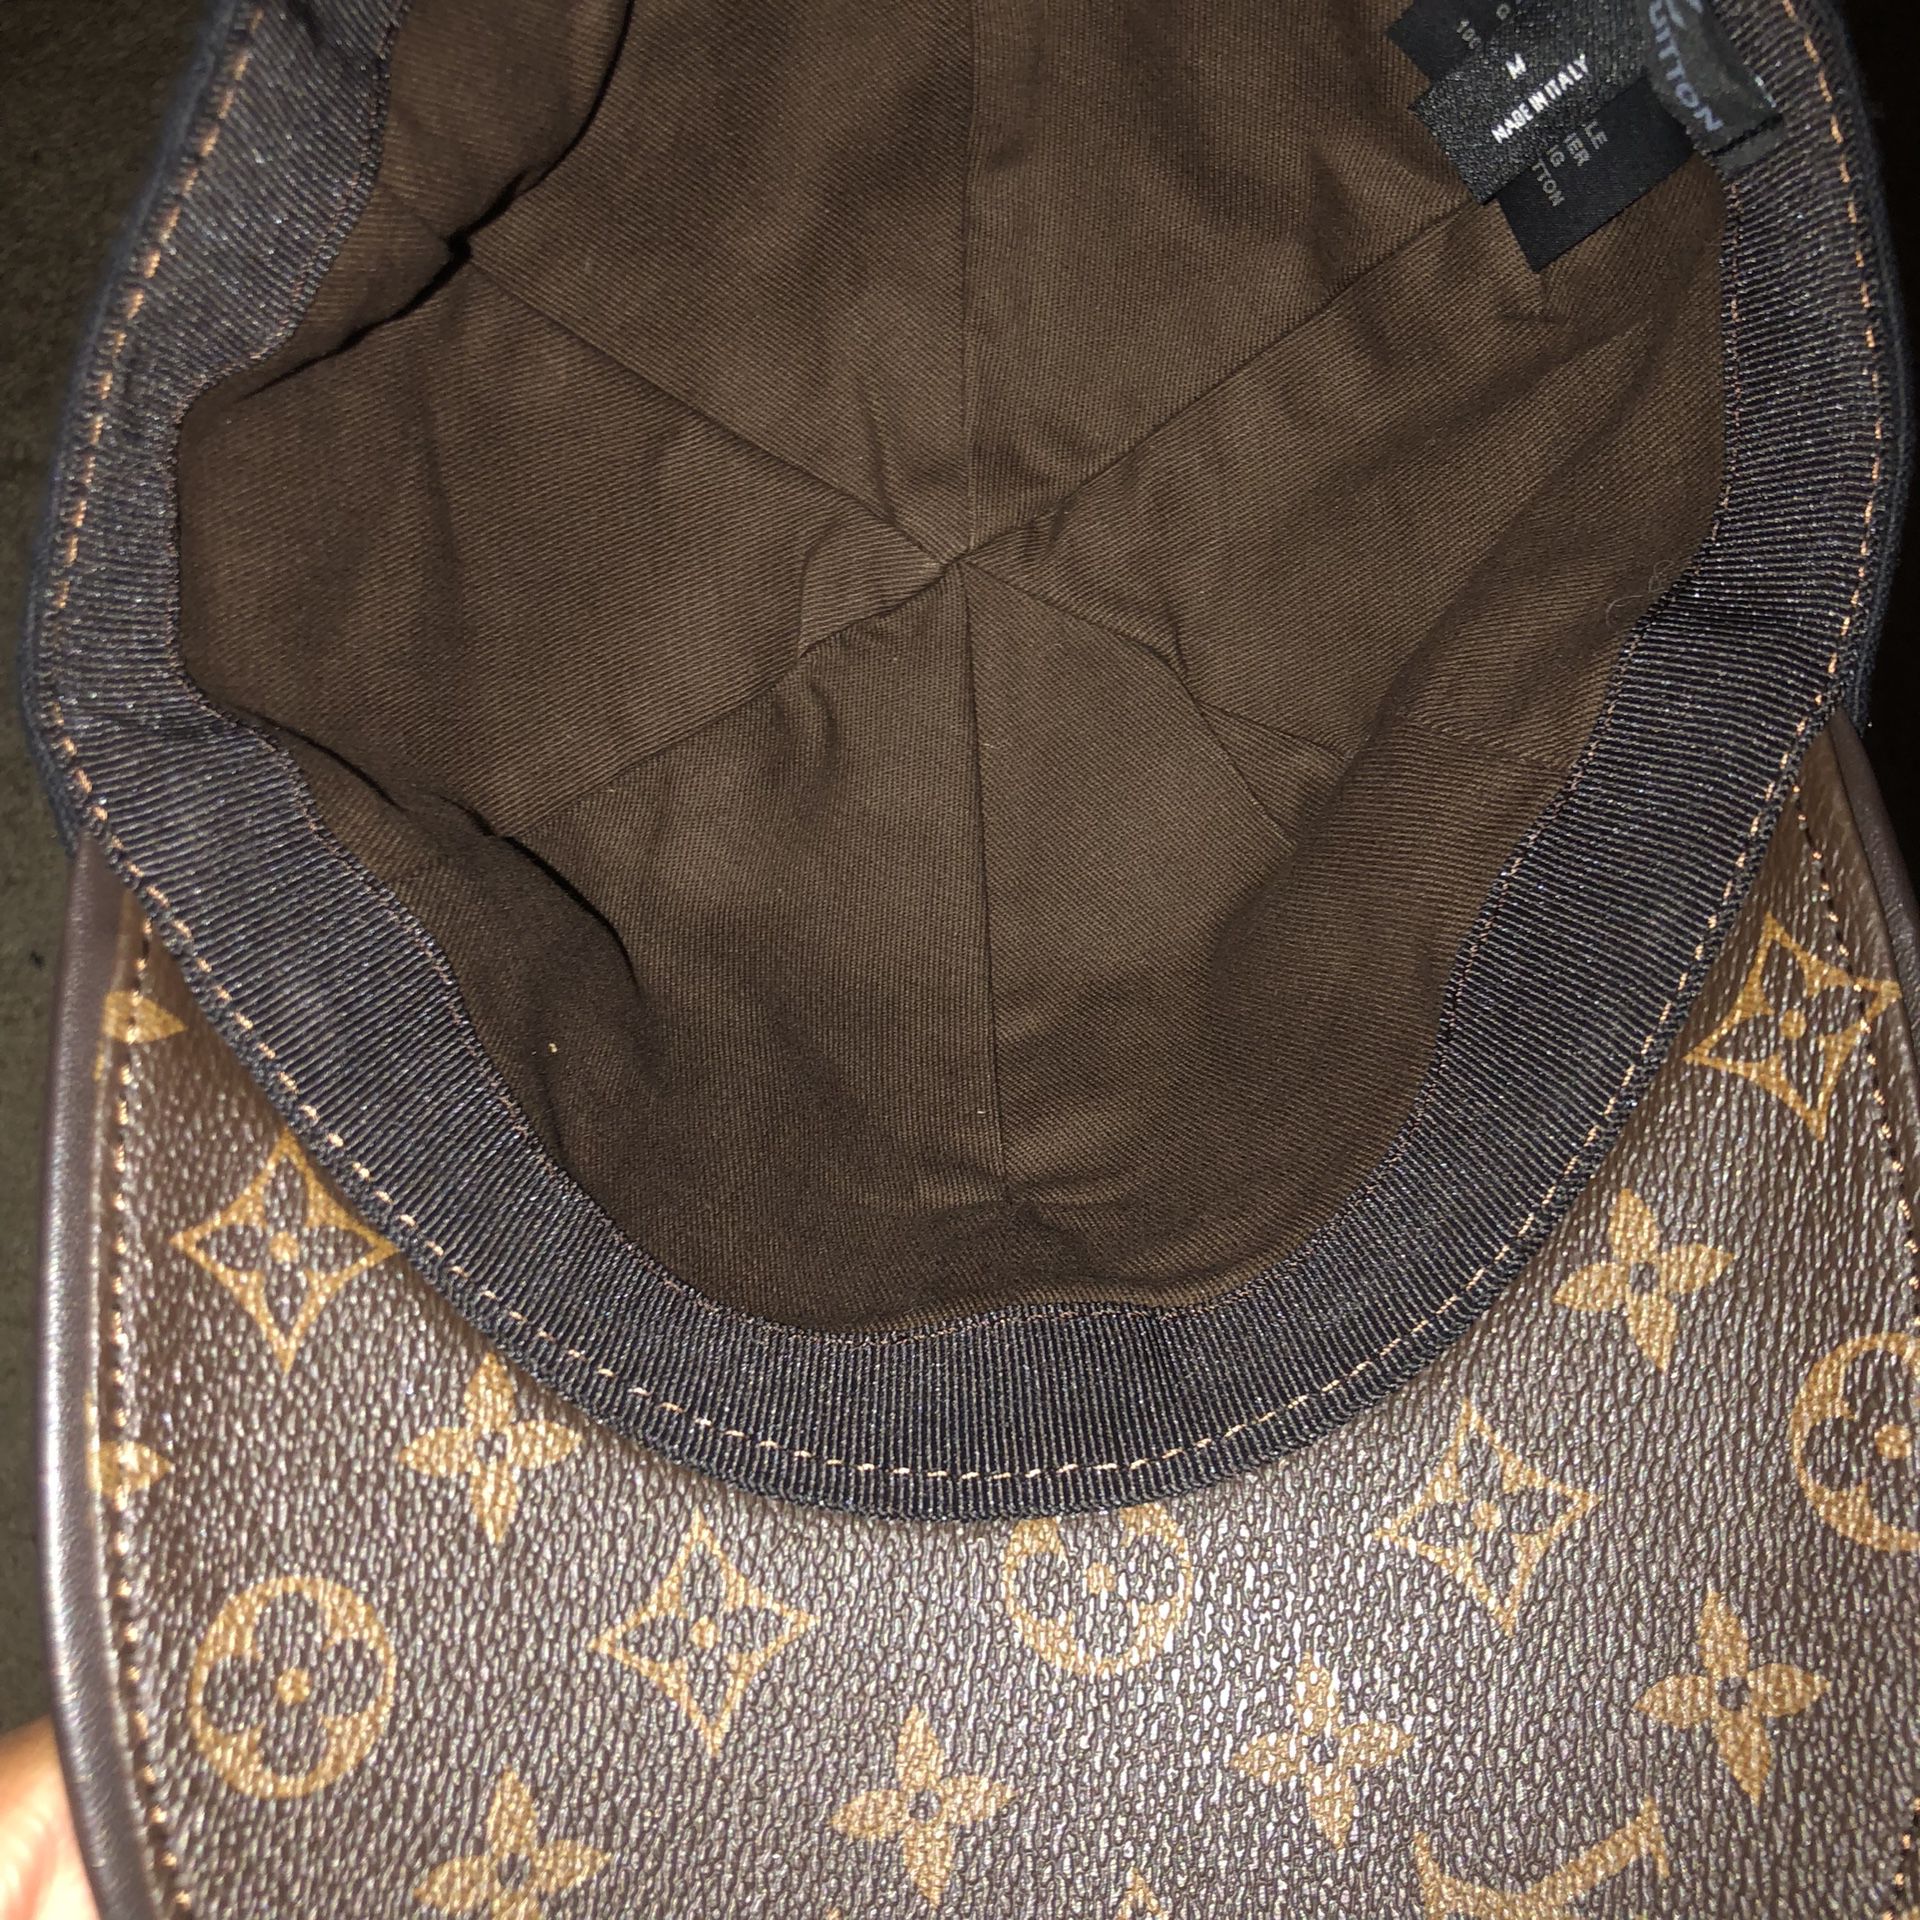 Supreme Louis vuitton beanie for Sale in East Los Angeles, CA - OfferUp